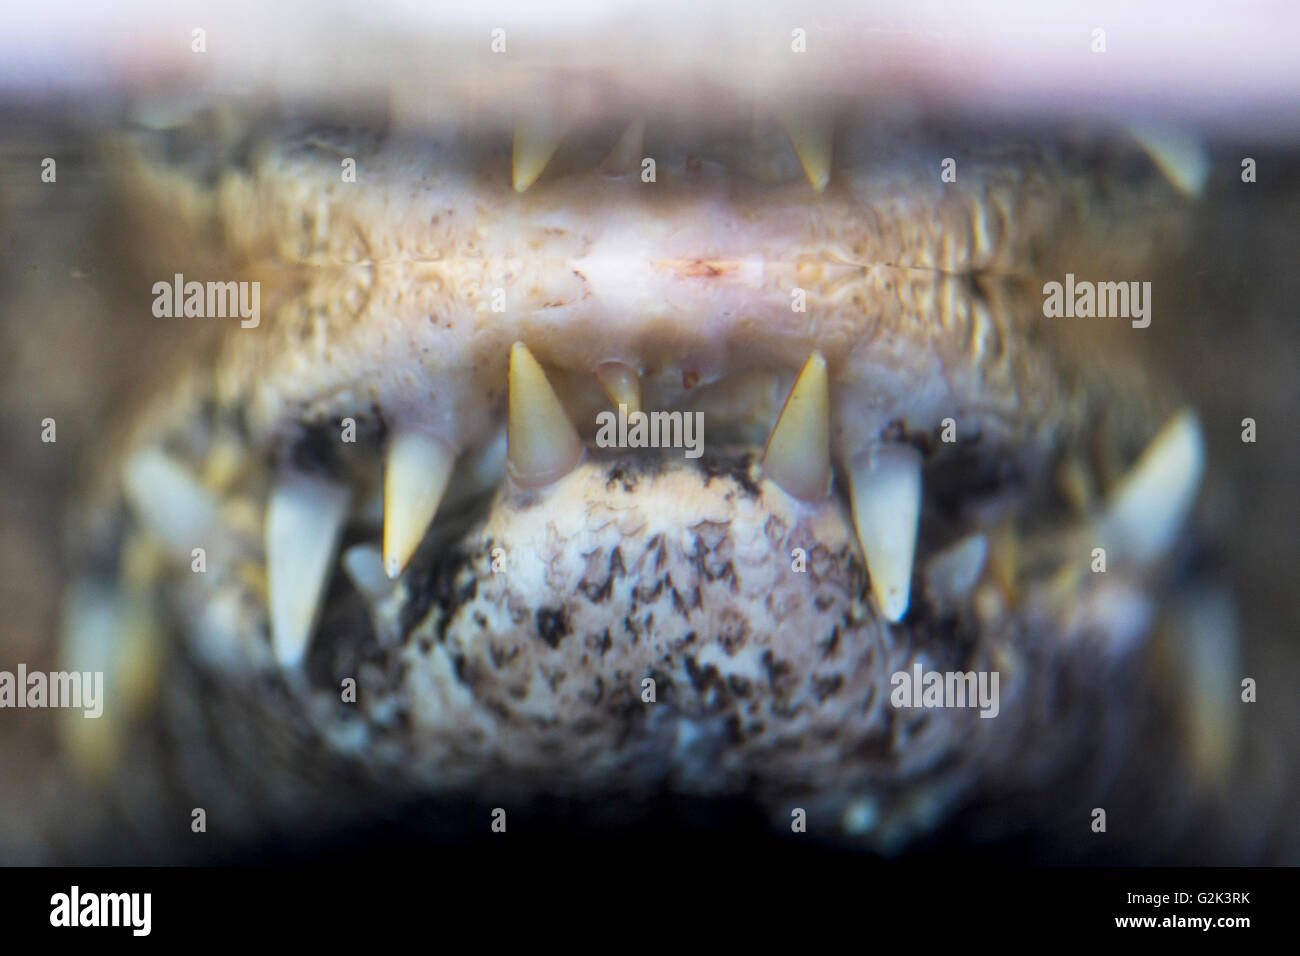 Closeup view of teeth of a threatening spectacled caiman, Caiman crocodilus Stock Photo